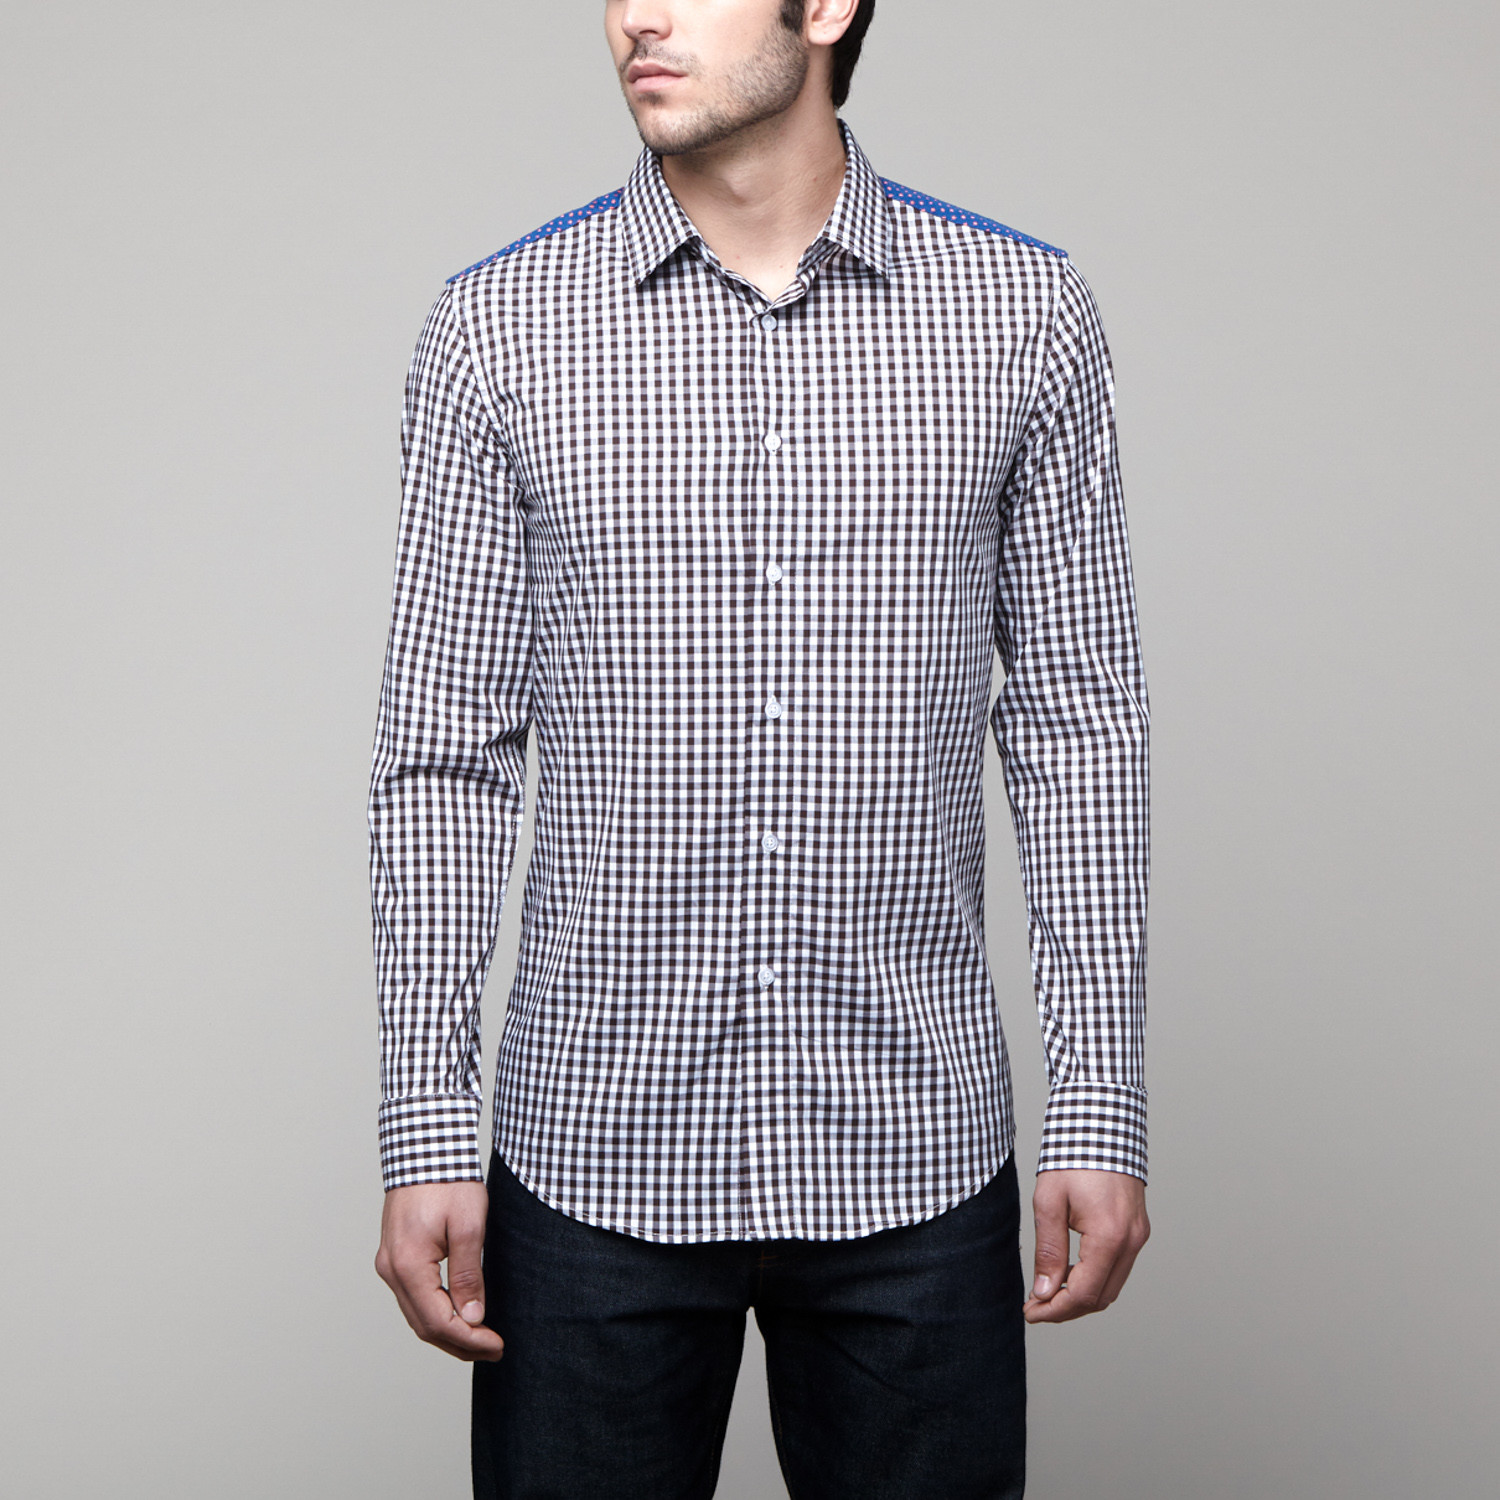 Patchy Sky Button-Up // Brown + White (S) - 611 - Touch of Modern